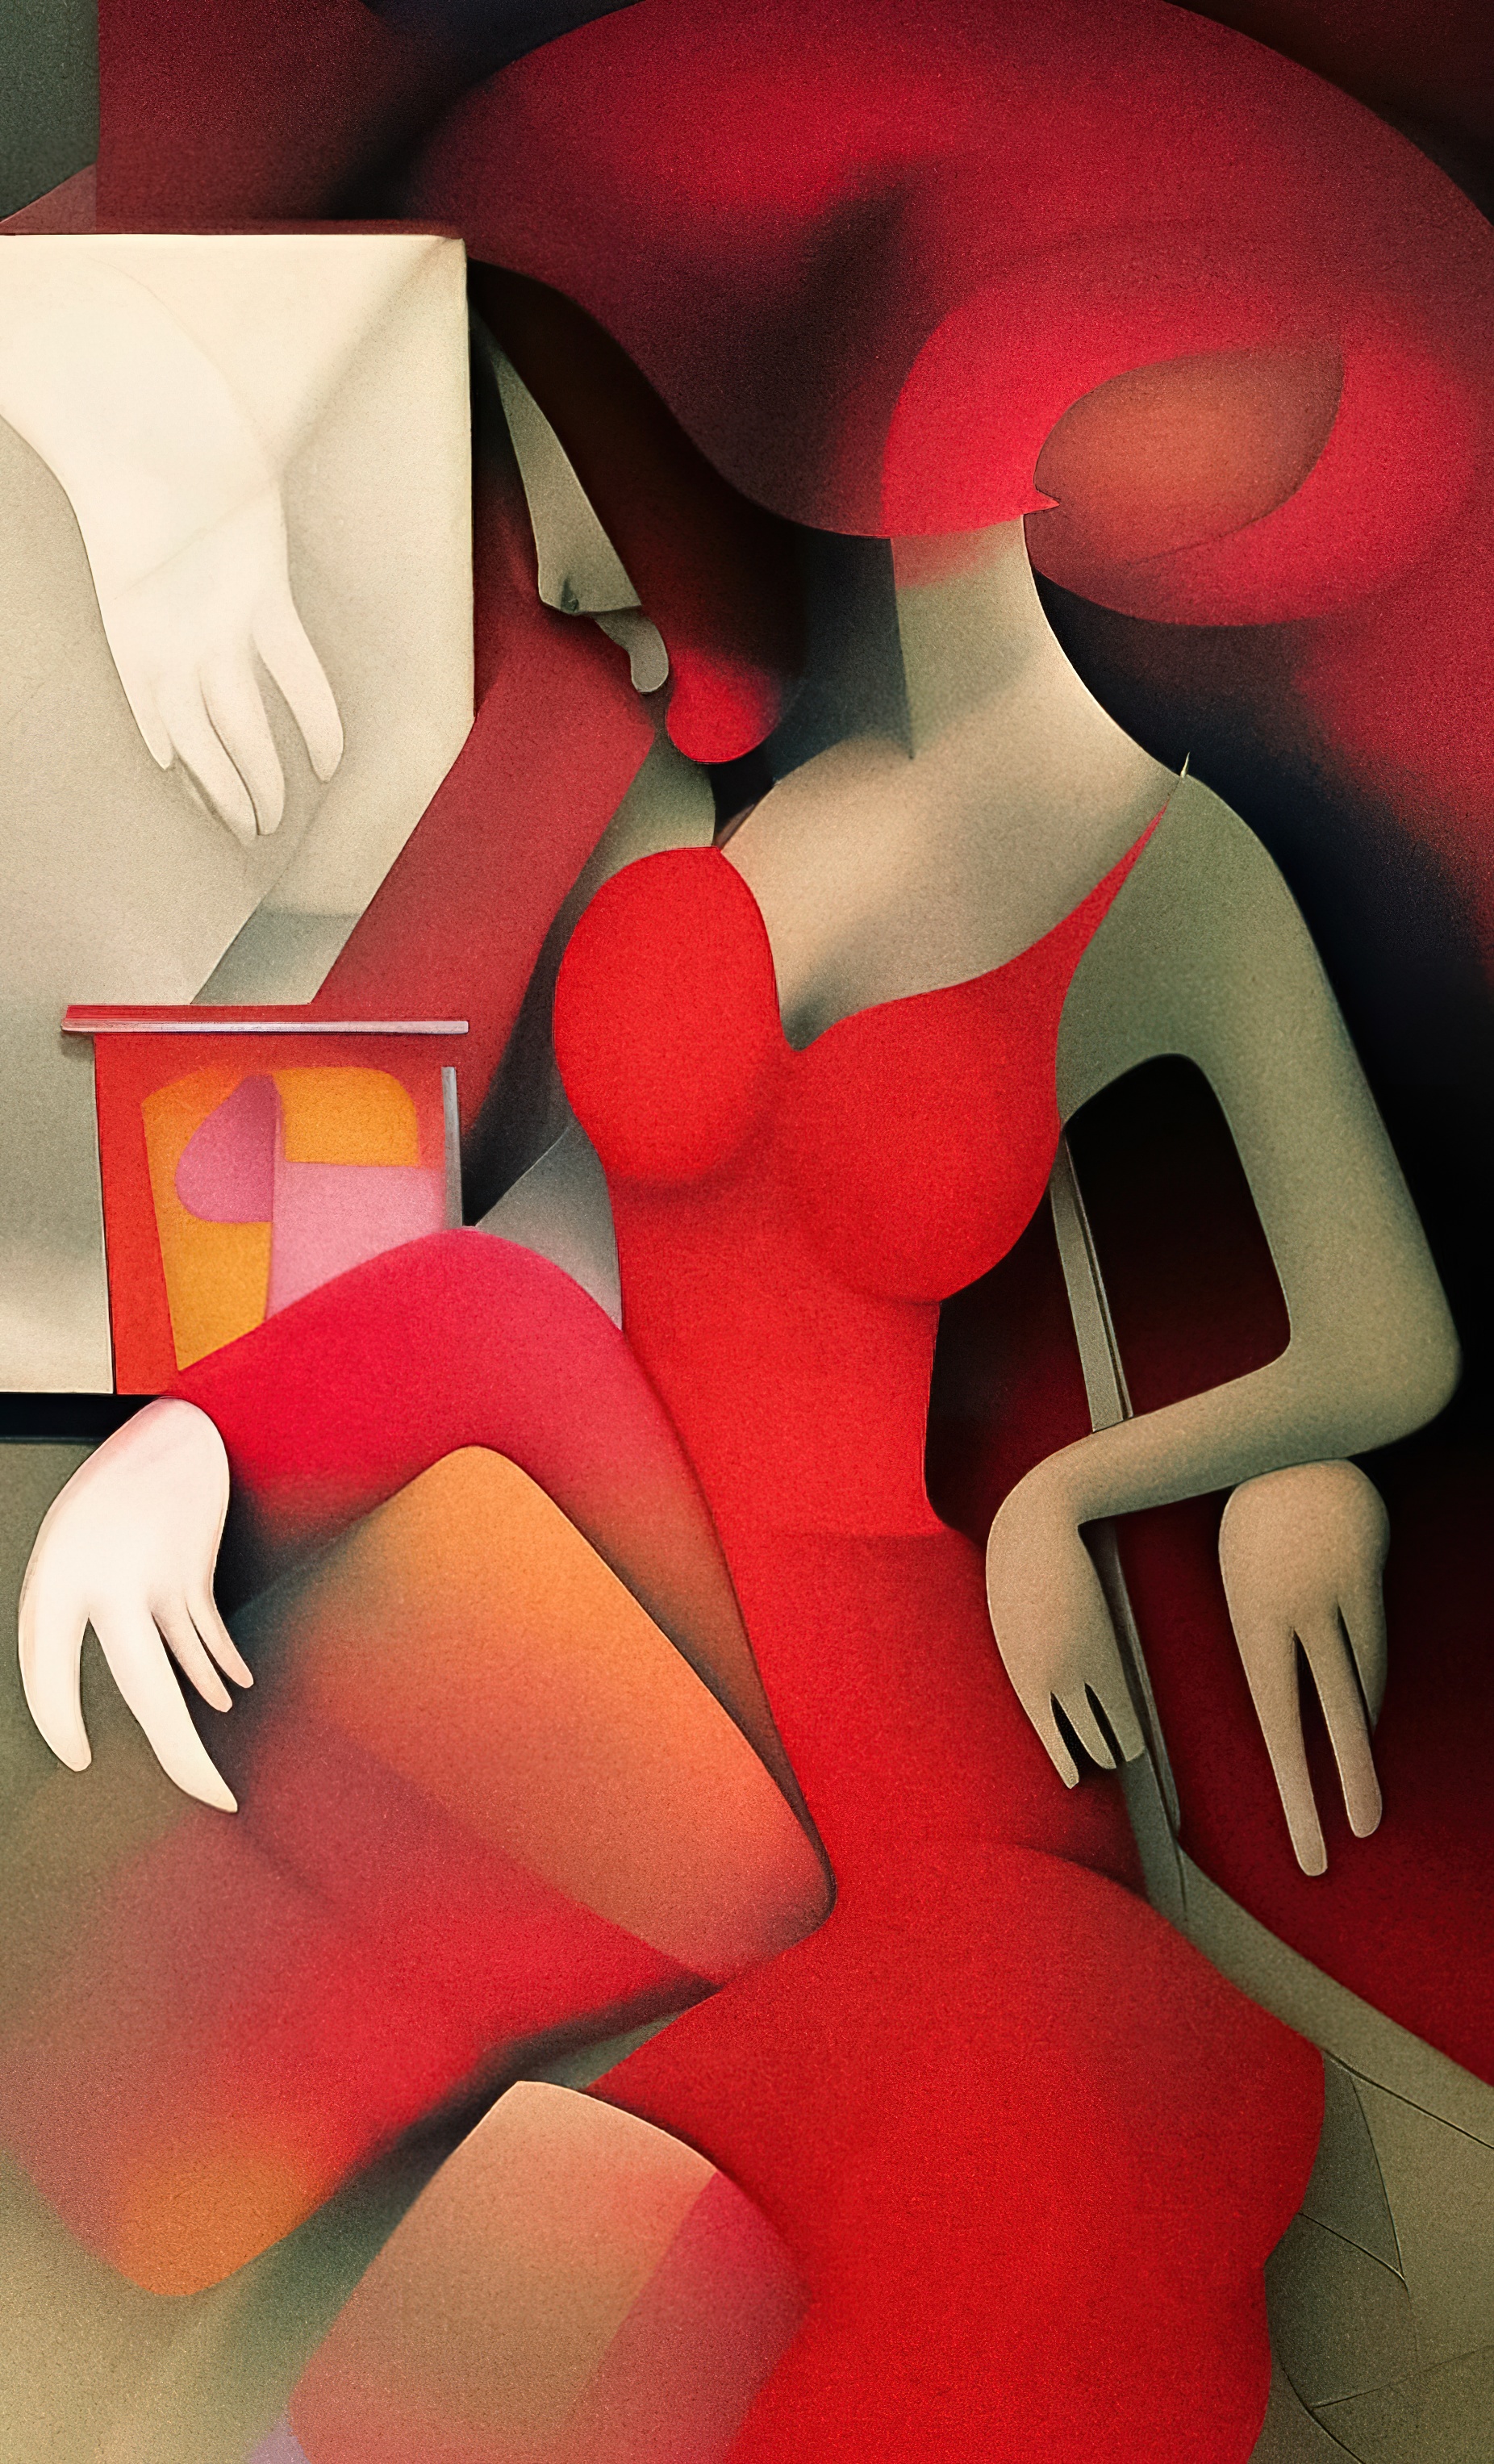 'Woman in Red #4' |Paolo Galleri|